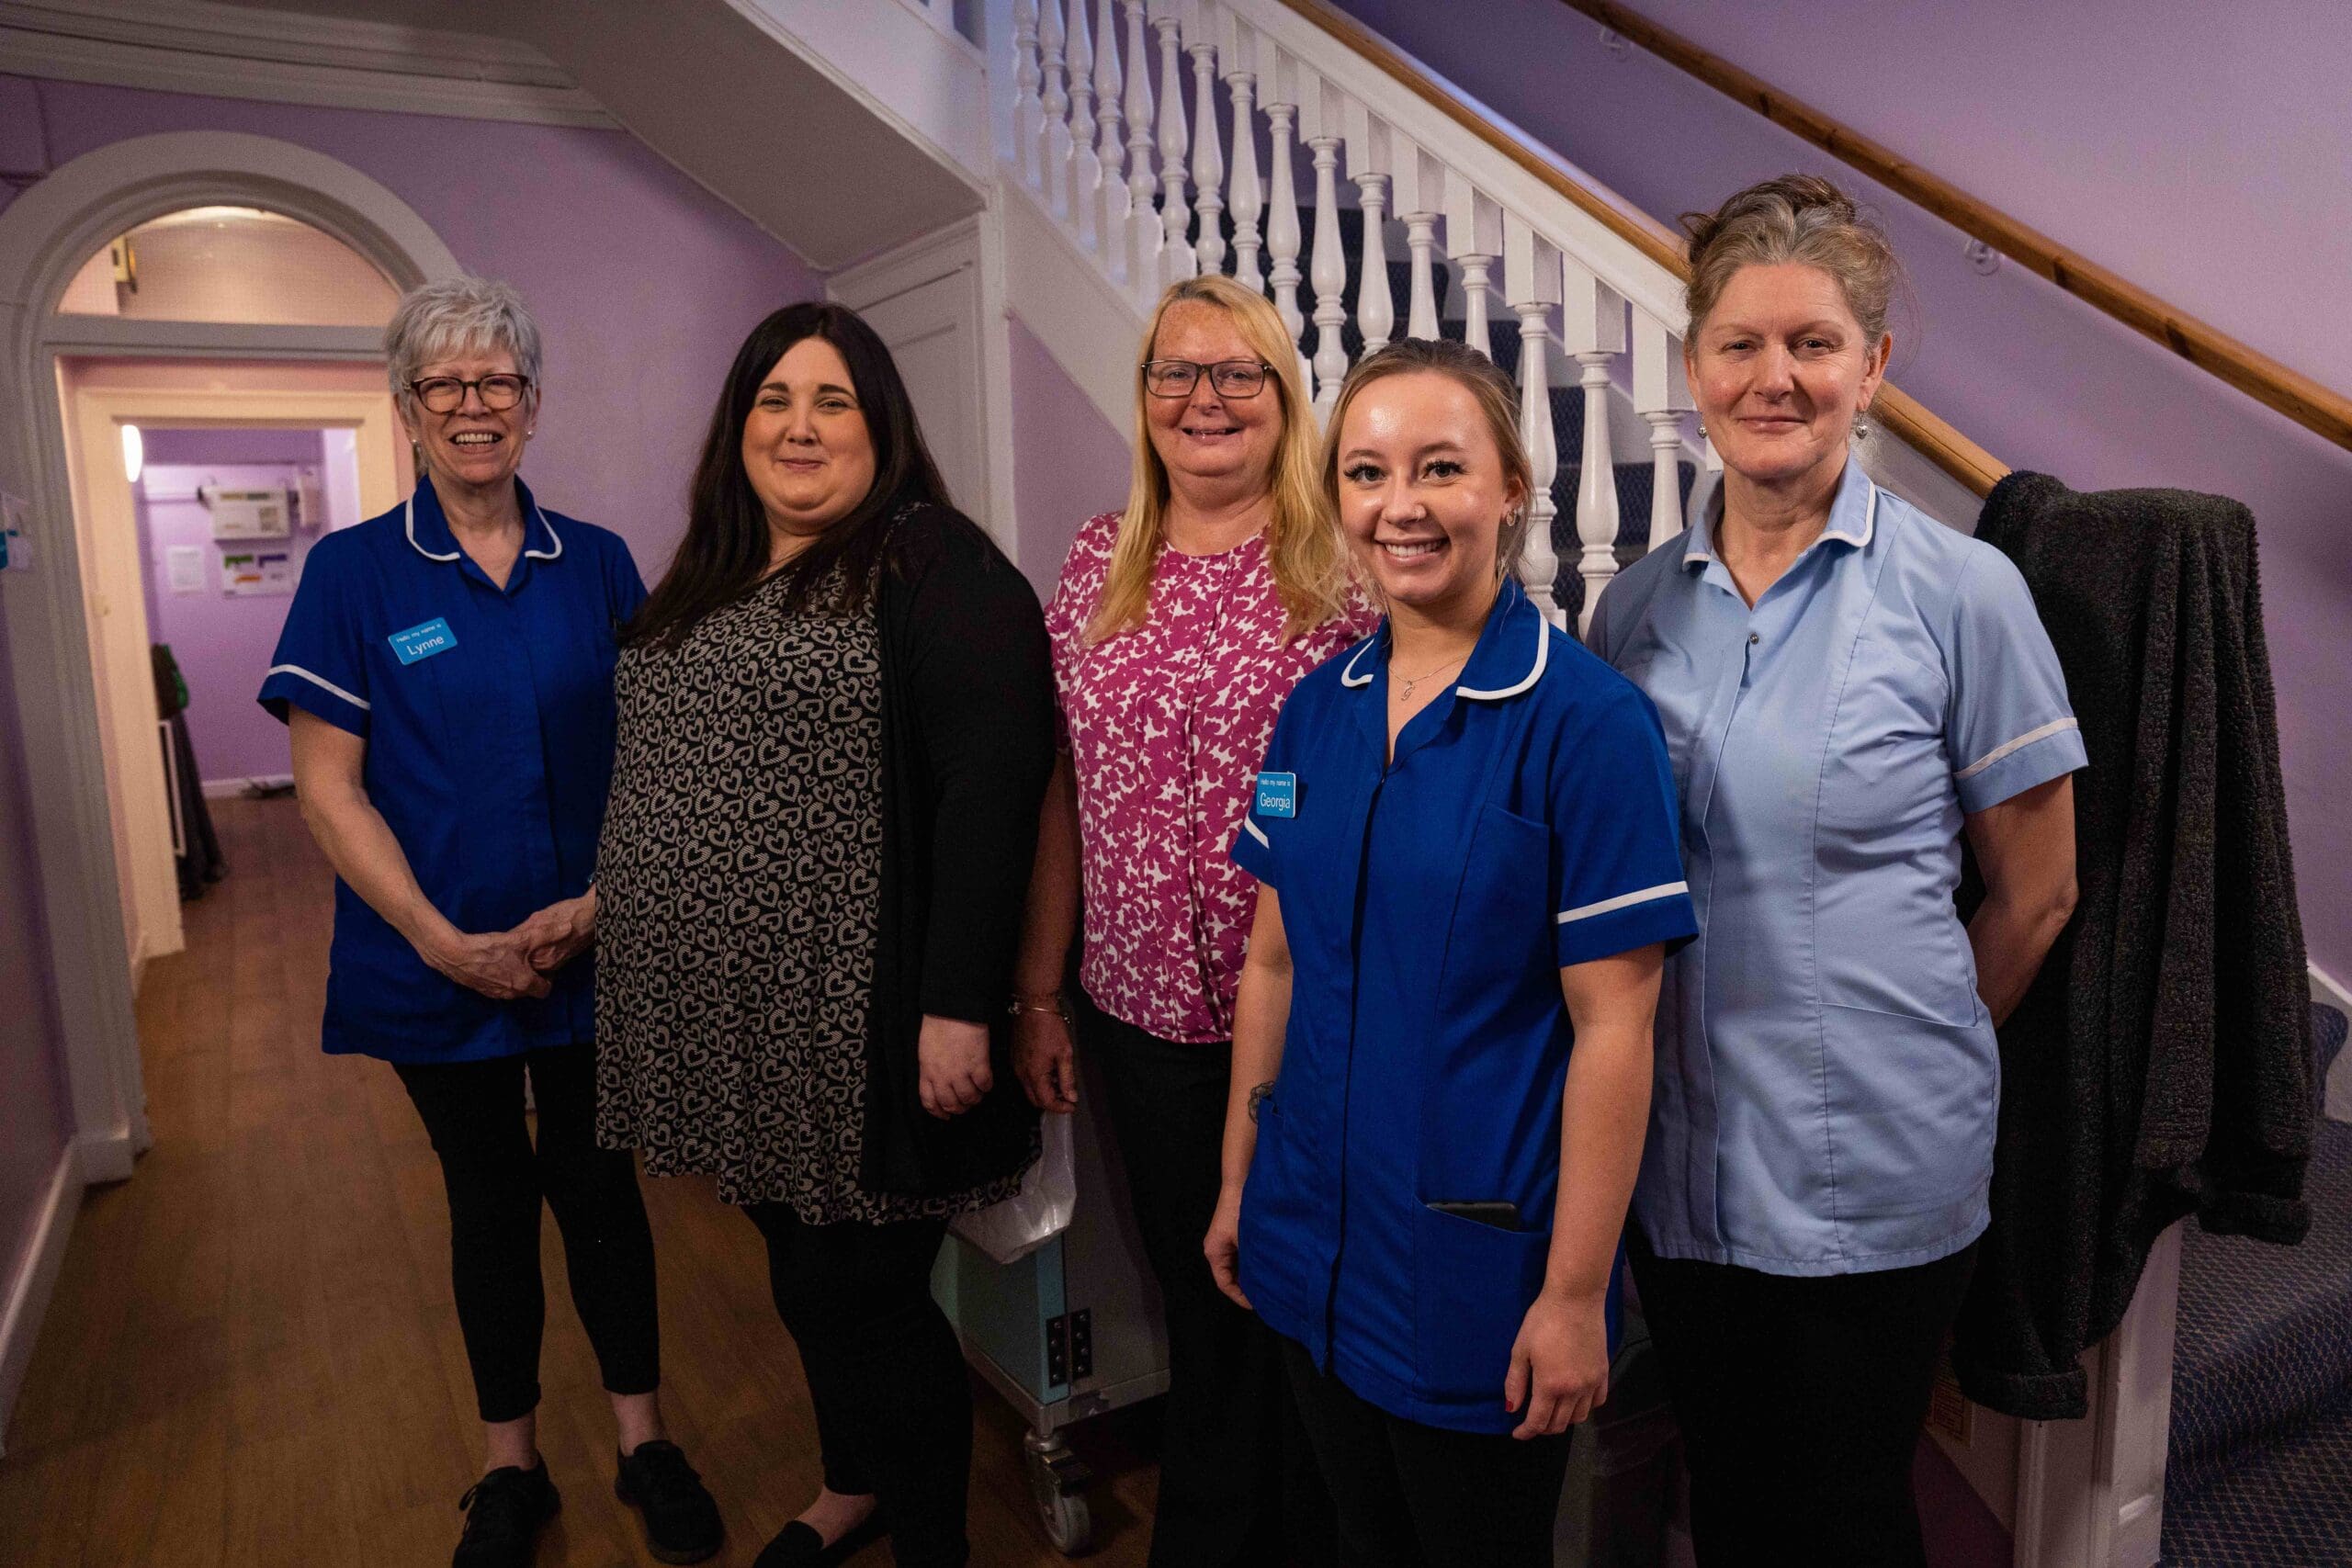 Our dedicated team provide first-class care for older people.